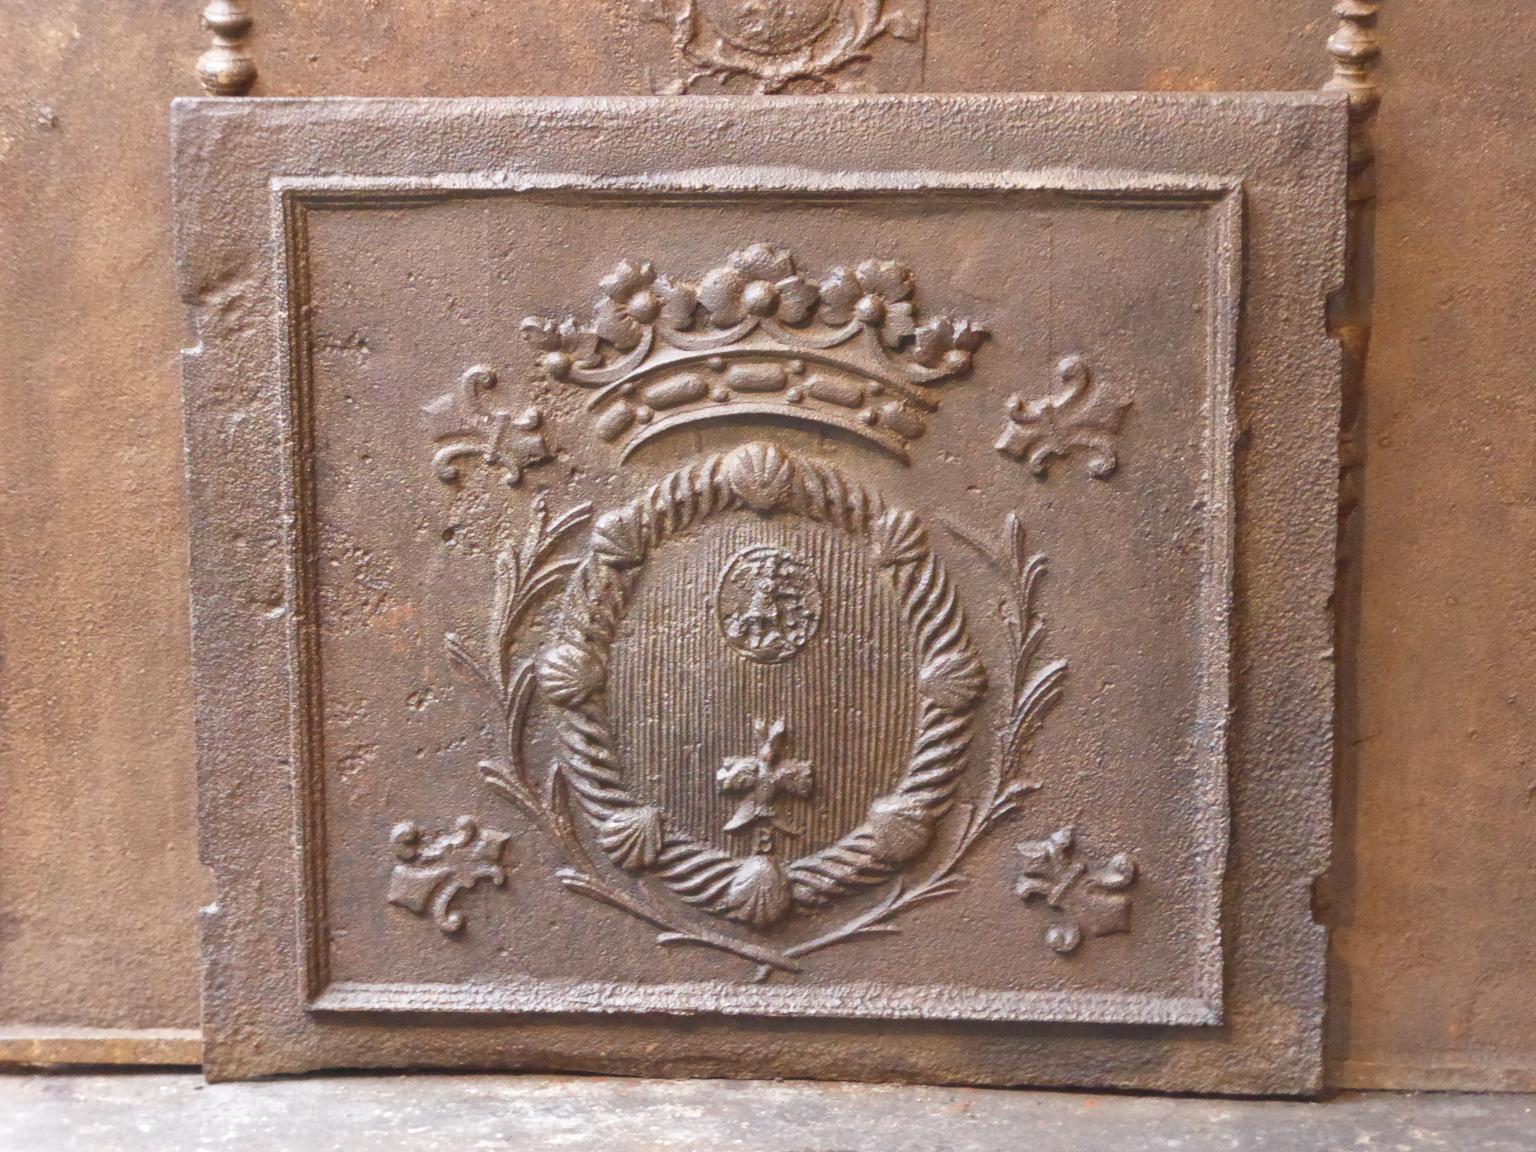 Magnificent 17th-18th century French Louis XIV fireback with an unknown coat of arms. The fireback is made of cast iron and has a natural brown patina. Upon request it can be made black / pewter. The fireback is in a good condition and does not have